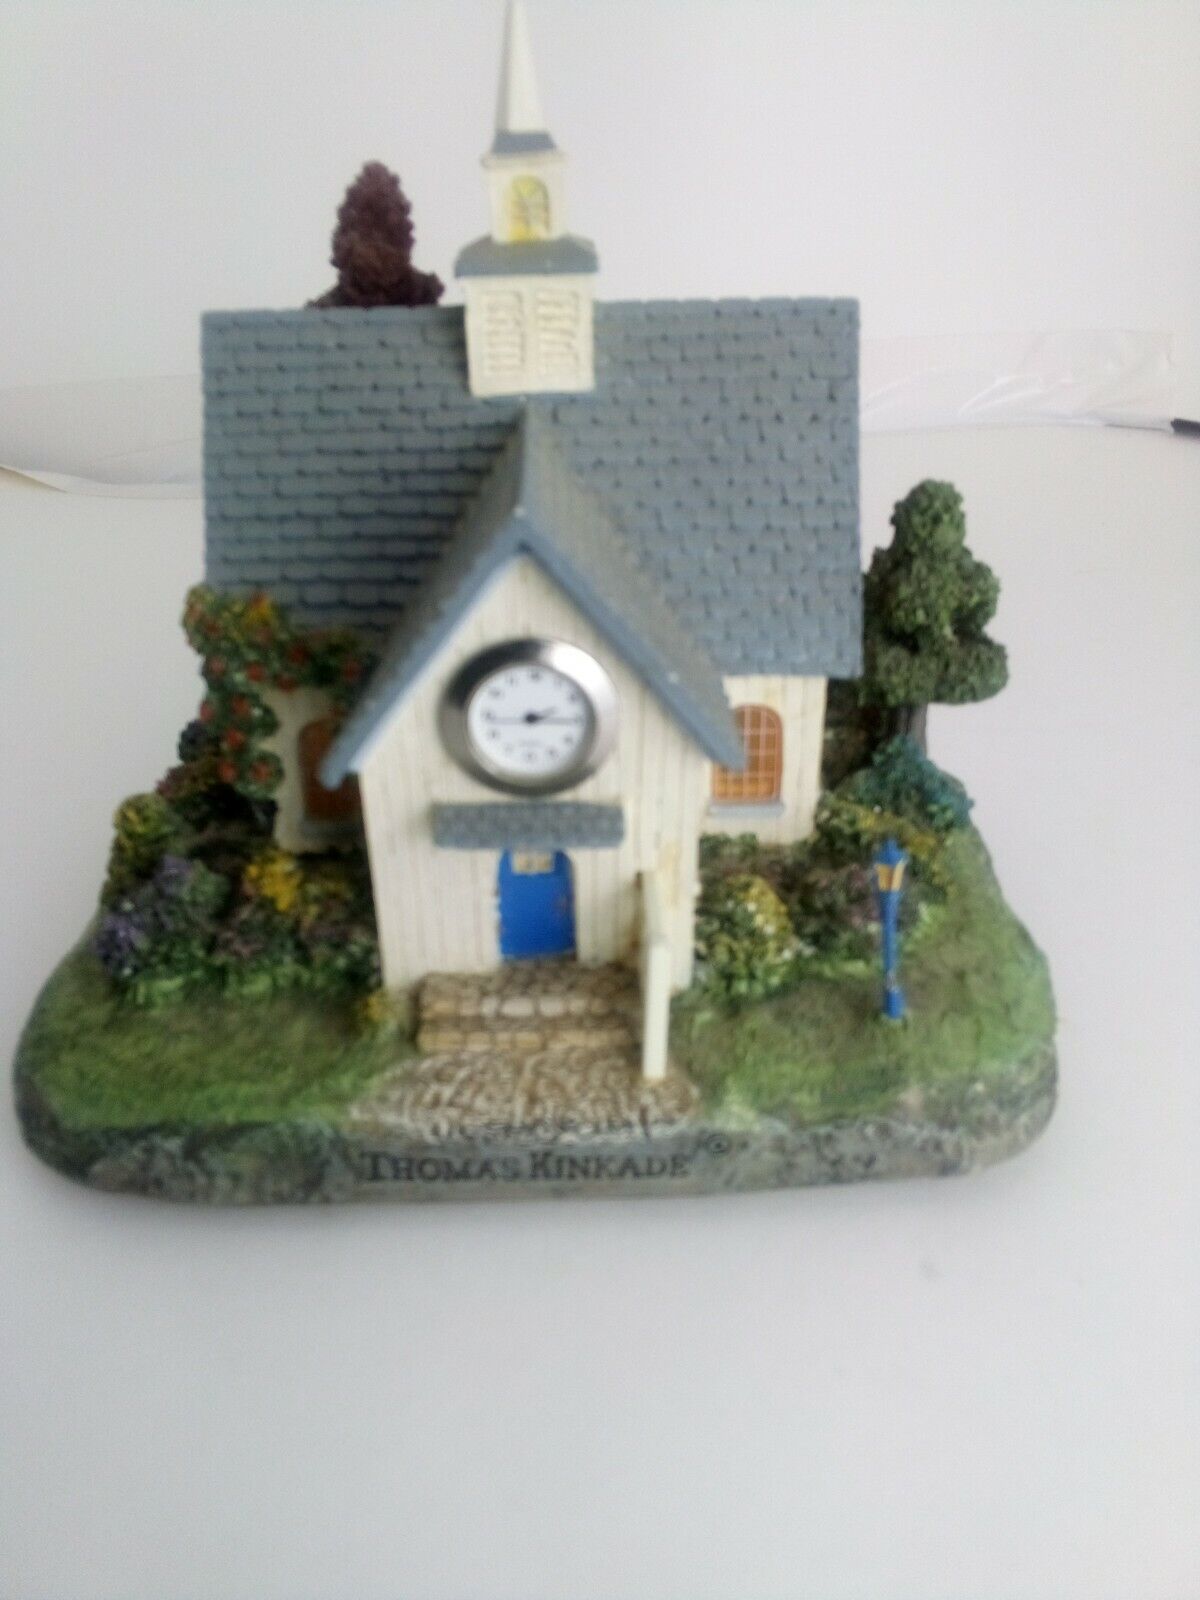 Thomas Kinkade Cottage Village The Forest Chapel Church Lighted Statue Clock